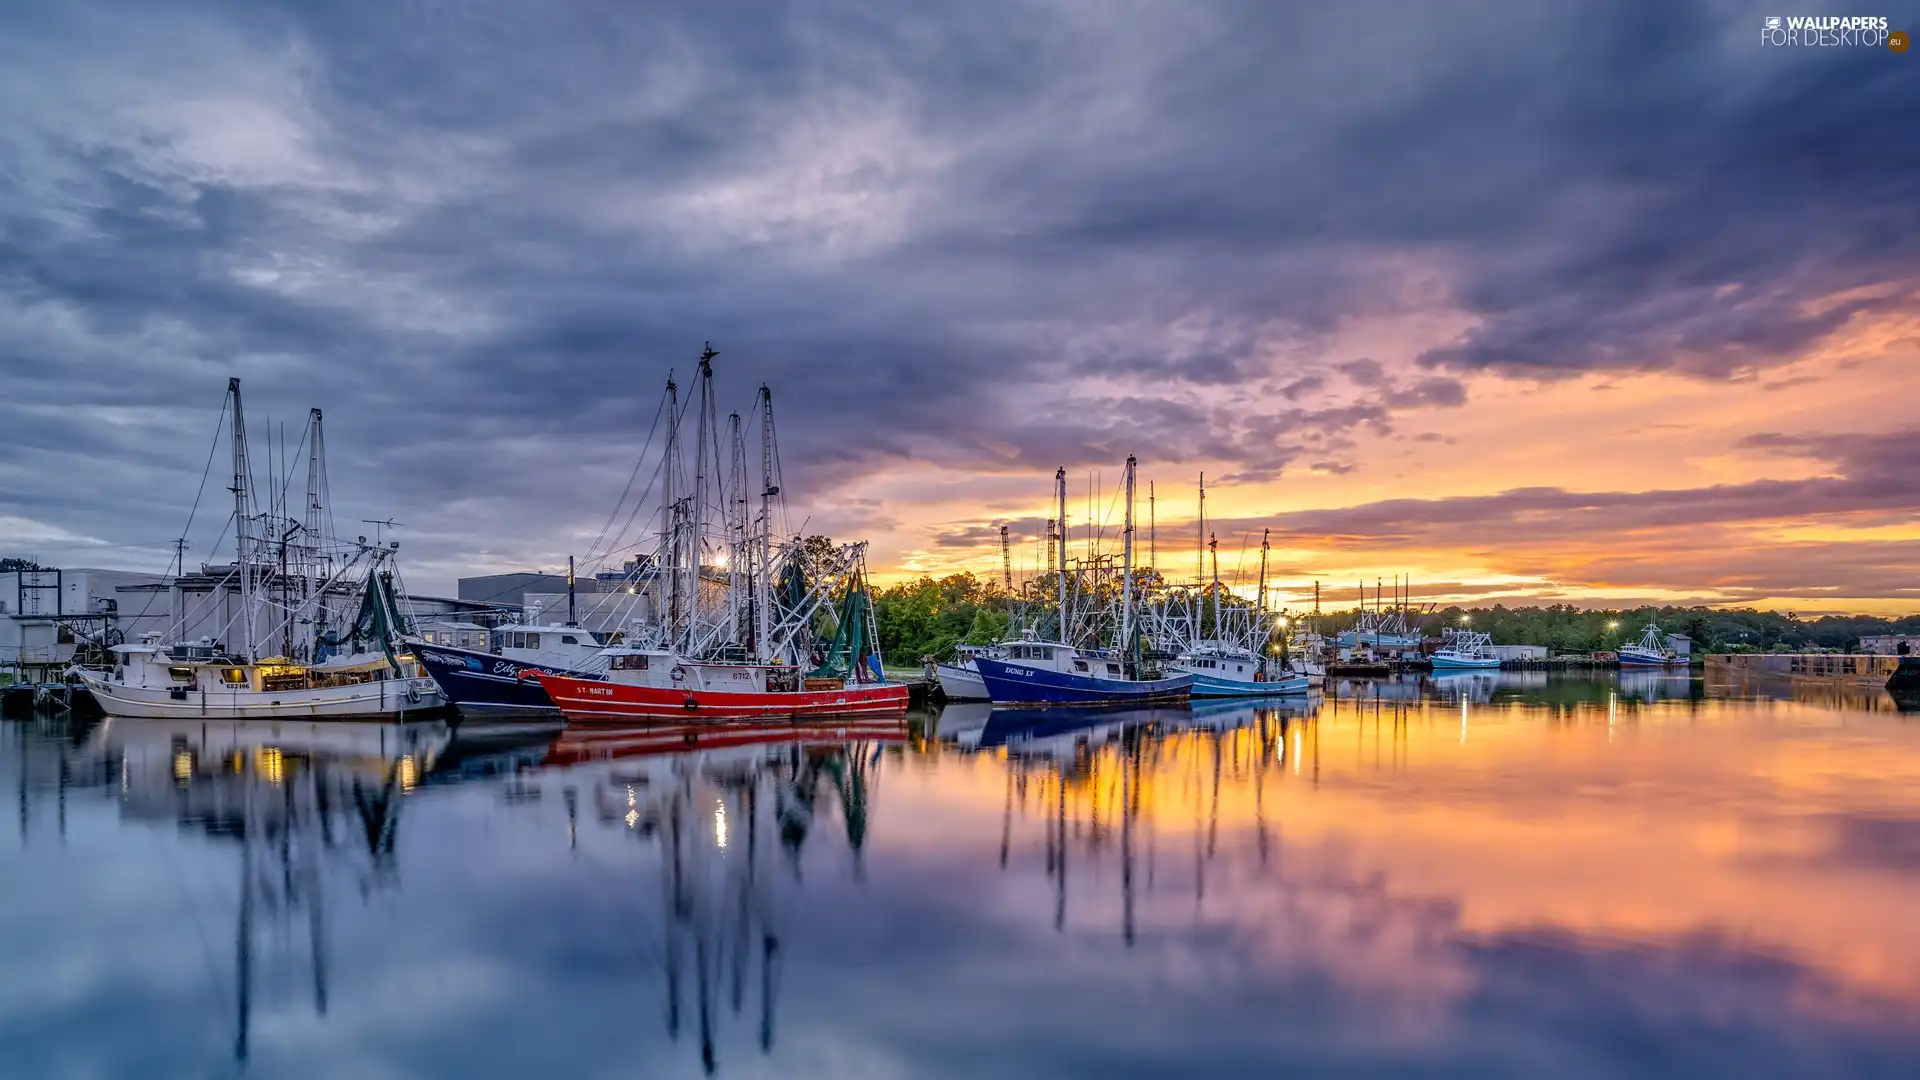 trees, port, Great Sunsets, clouds, viewes, Sailboats